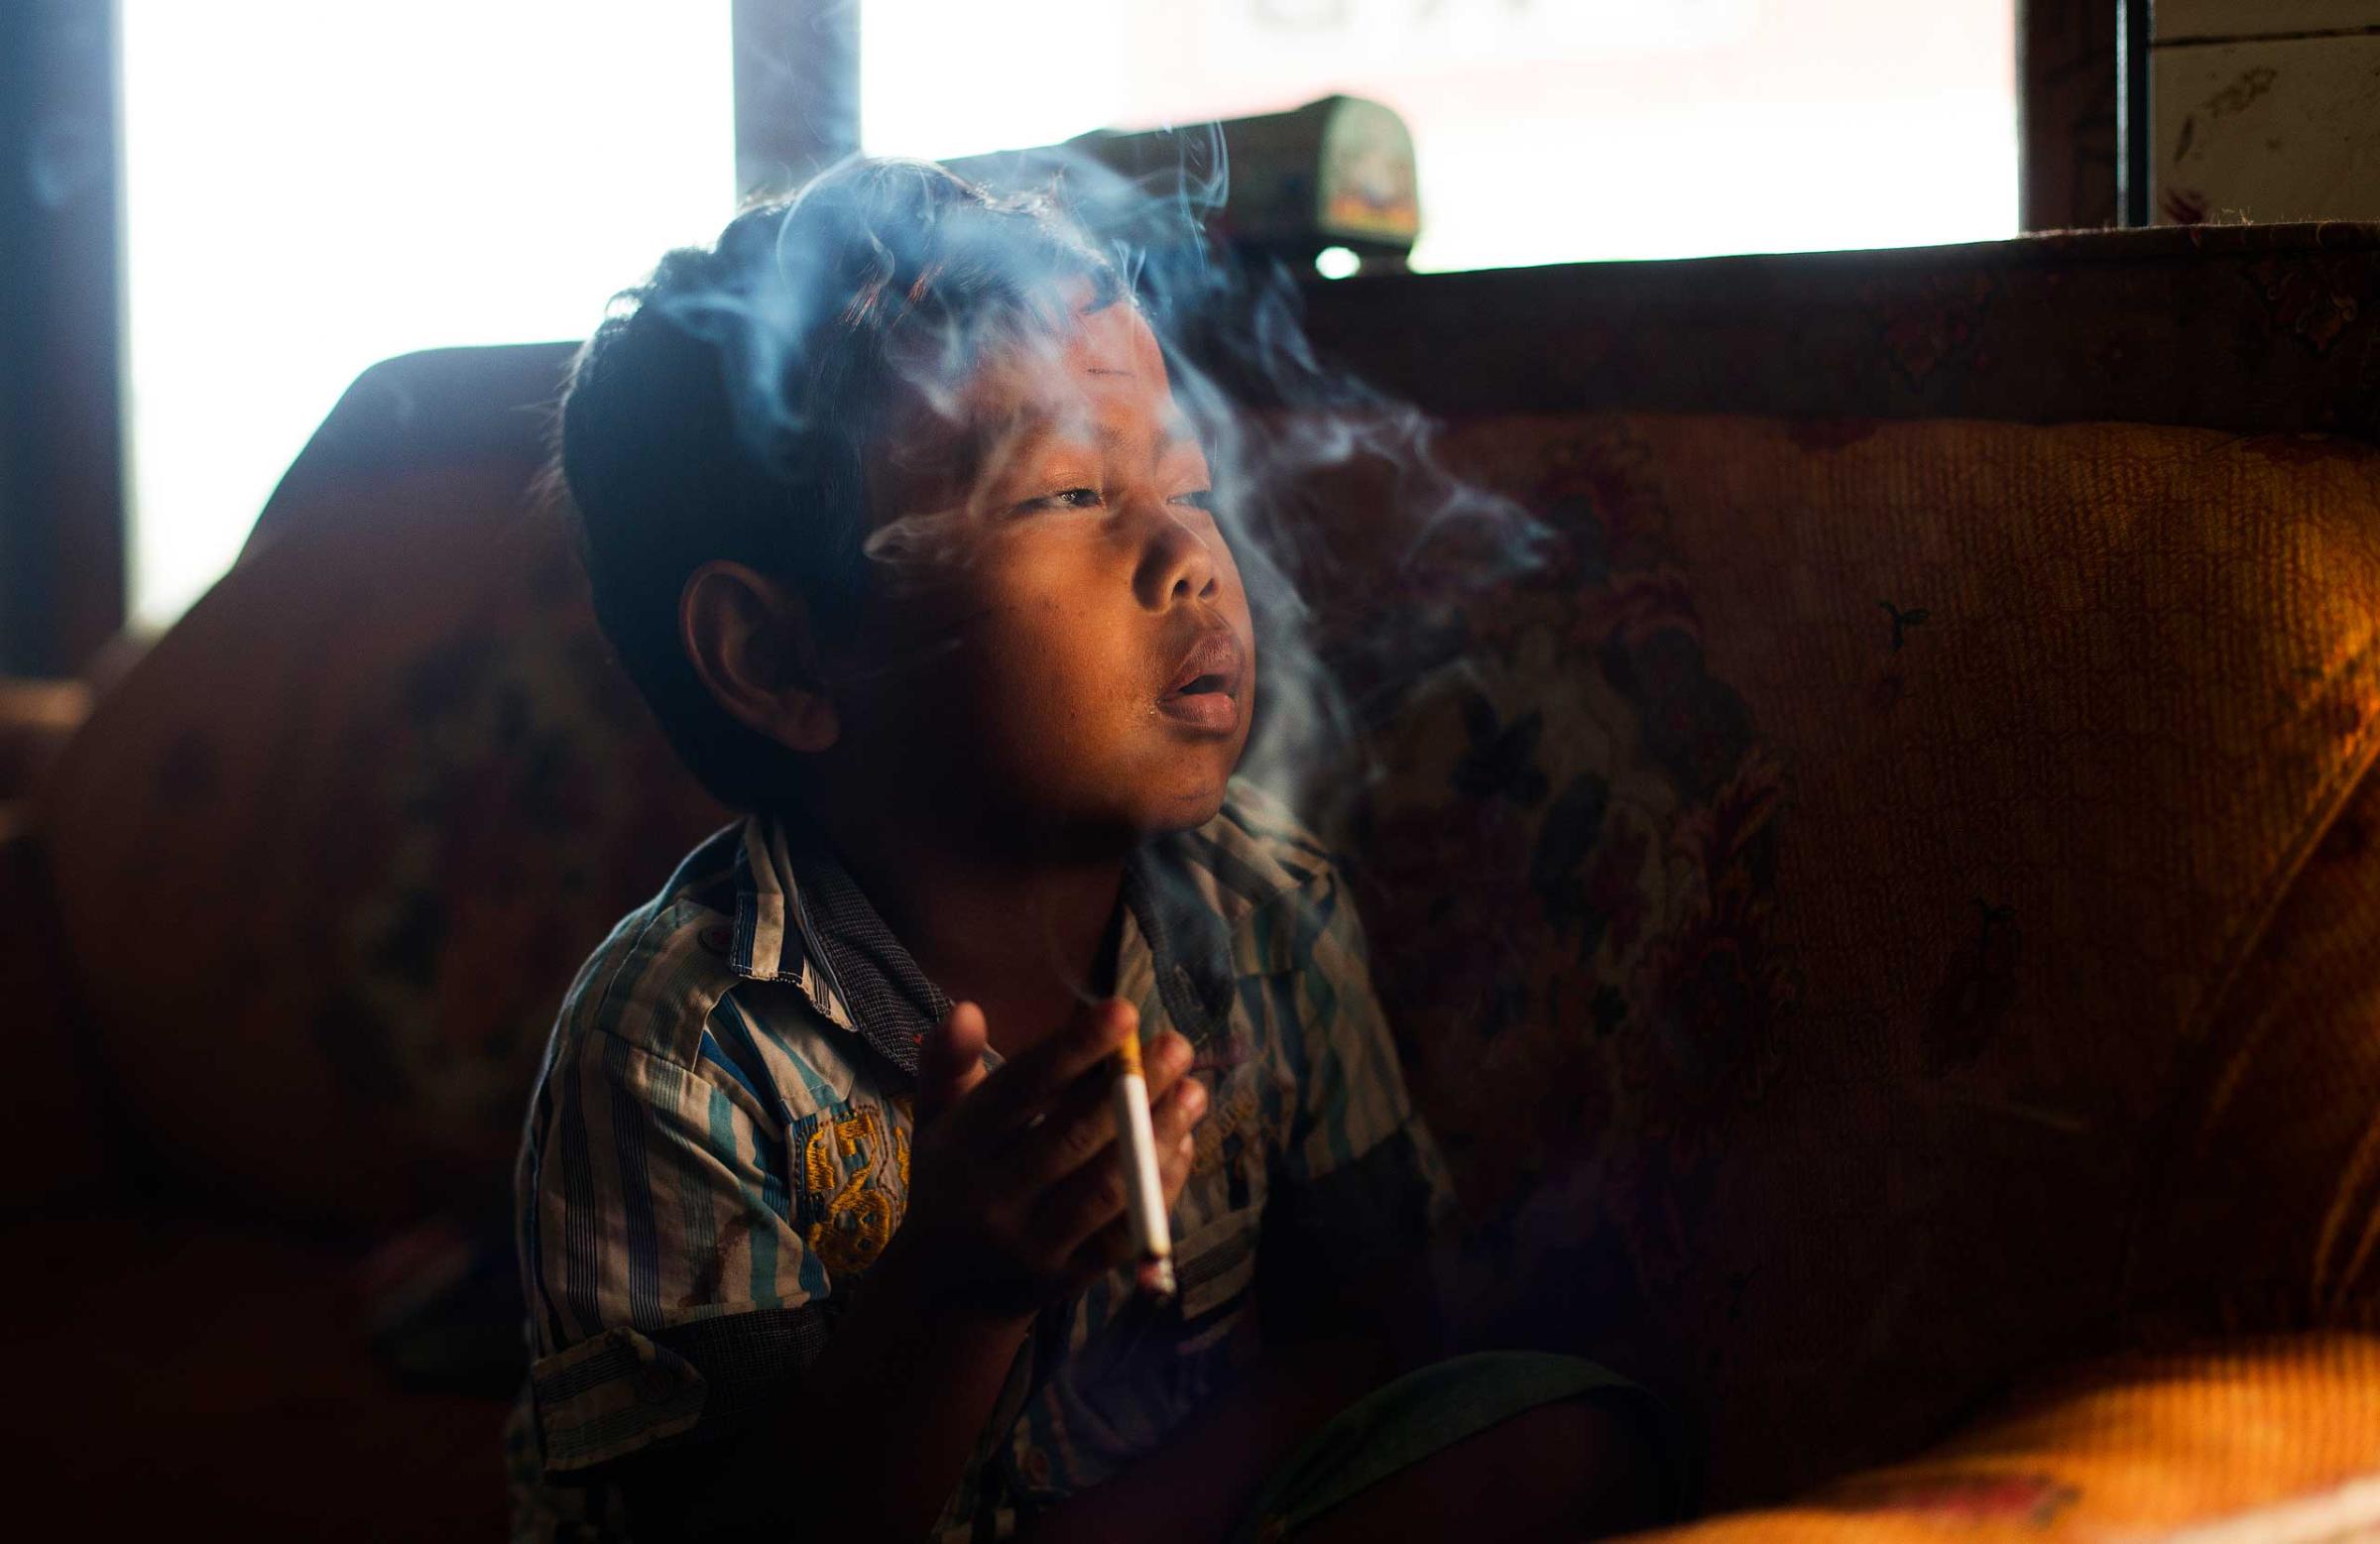 Dihan Muhamad smokes in his home in a village near the town of Garut, Indonesia on February 10, 2014.